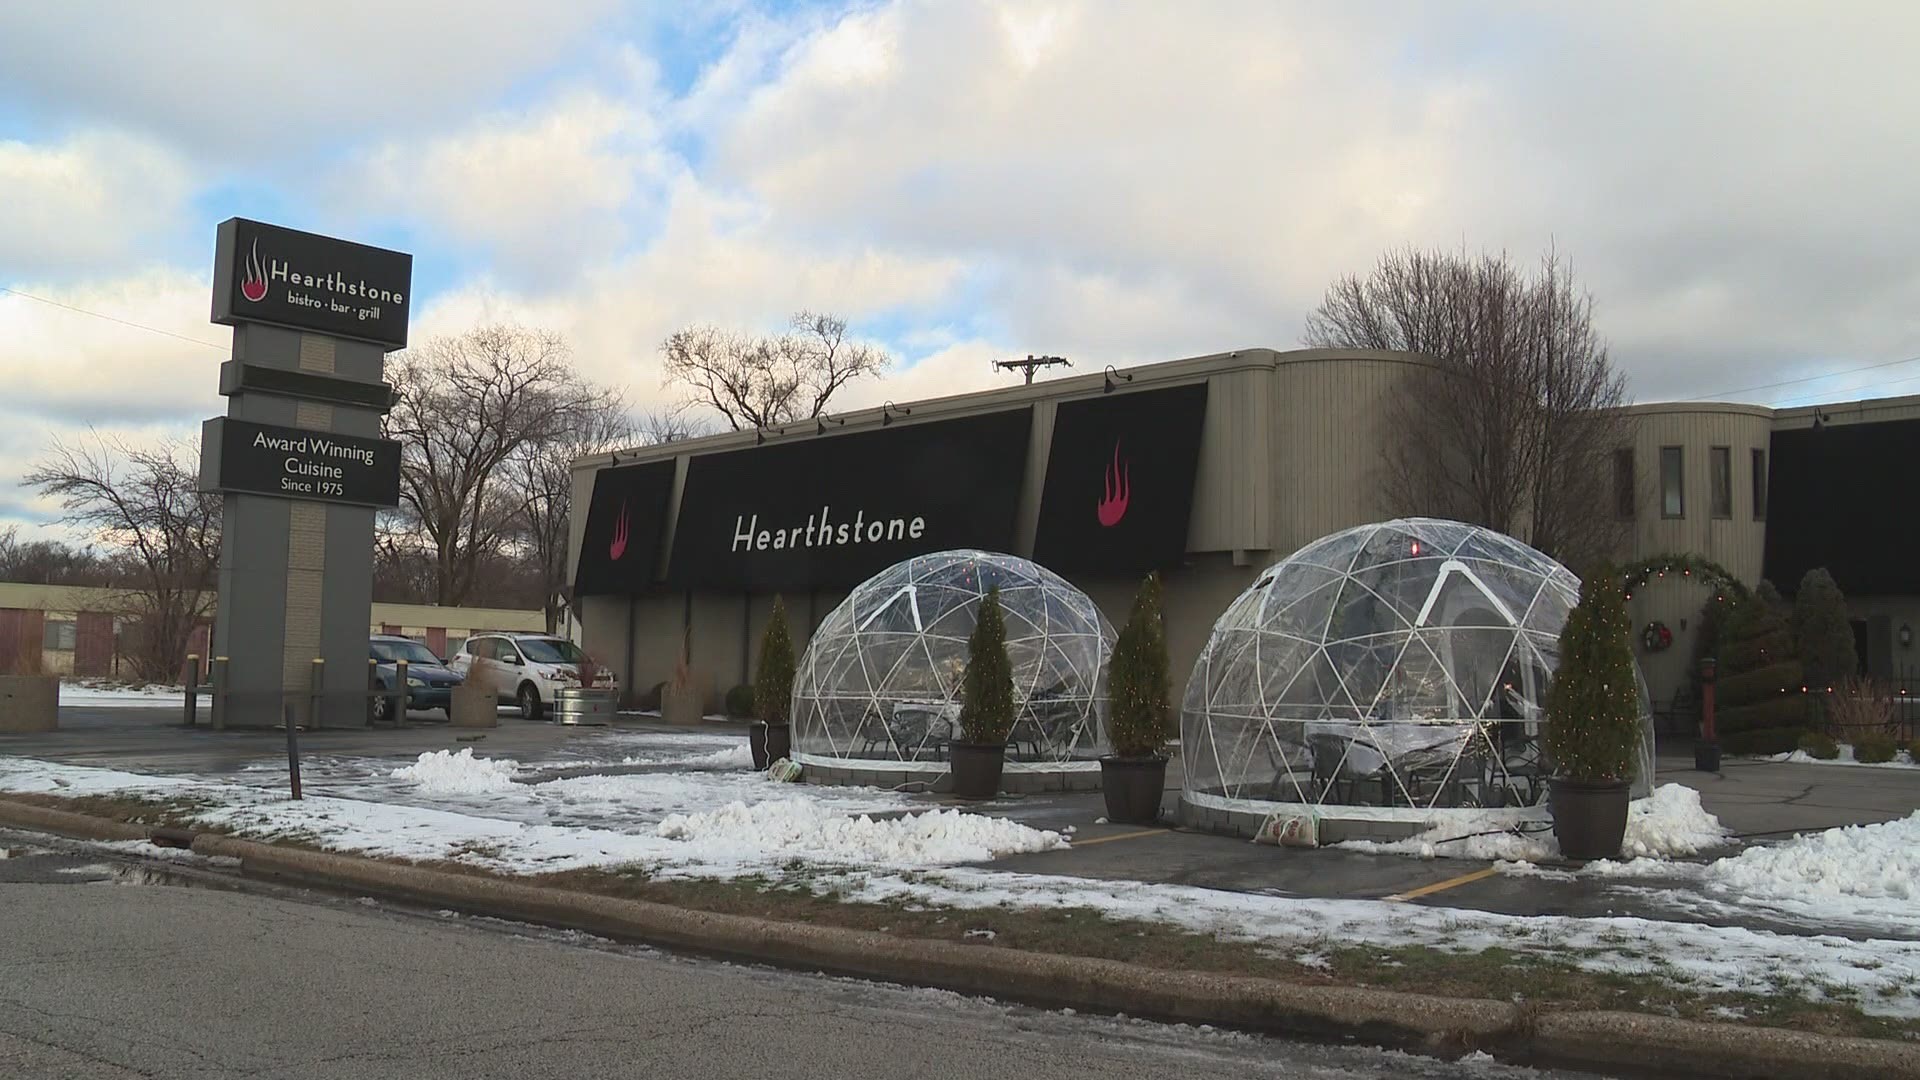 Hearthstone Bistro in Muskegon auctioned-off a few of their outdoor igloos for New Year's Eve, with a portion of the proceeds going to charity.